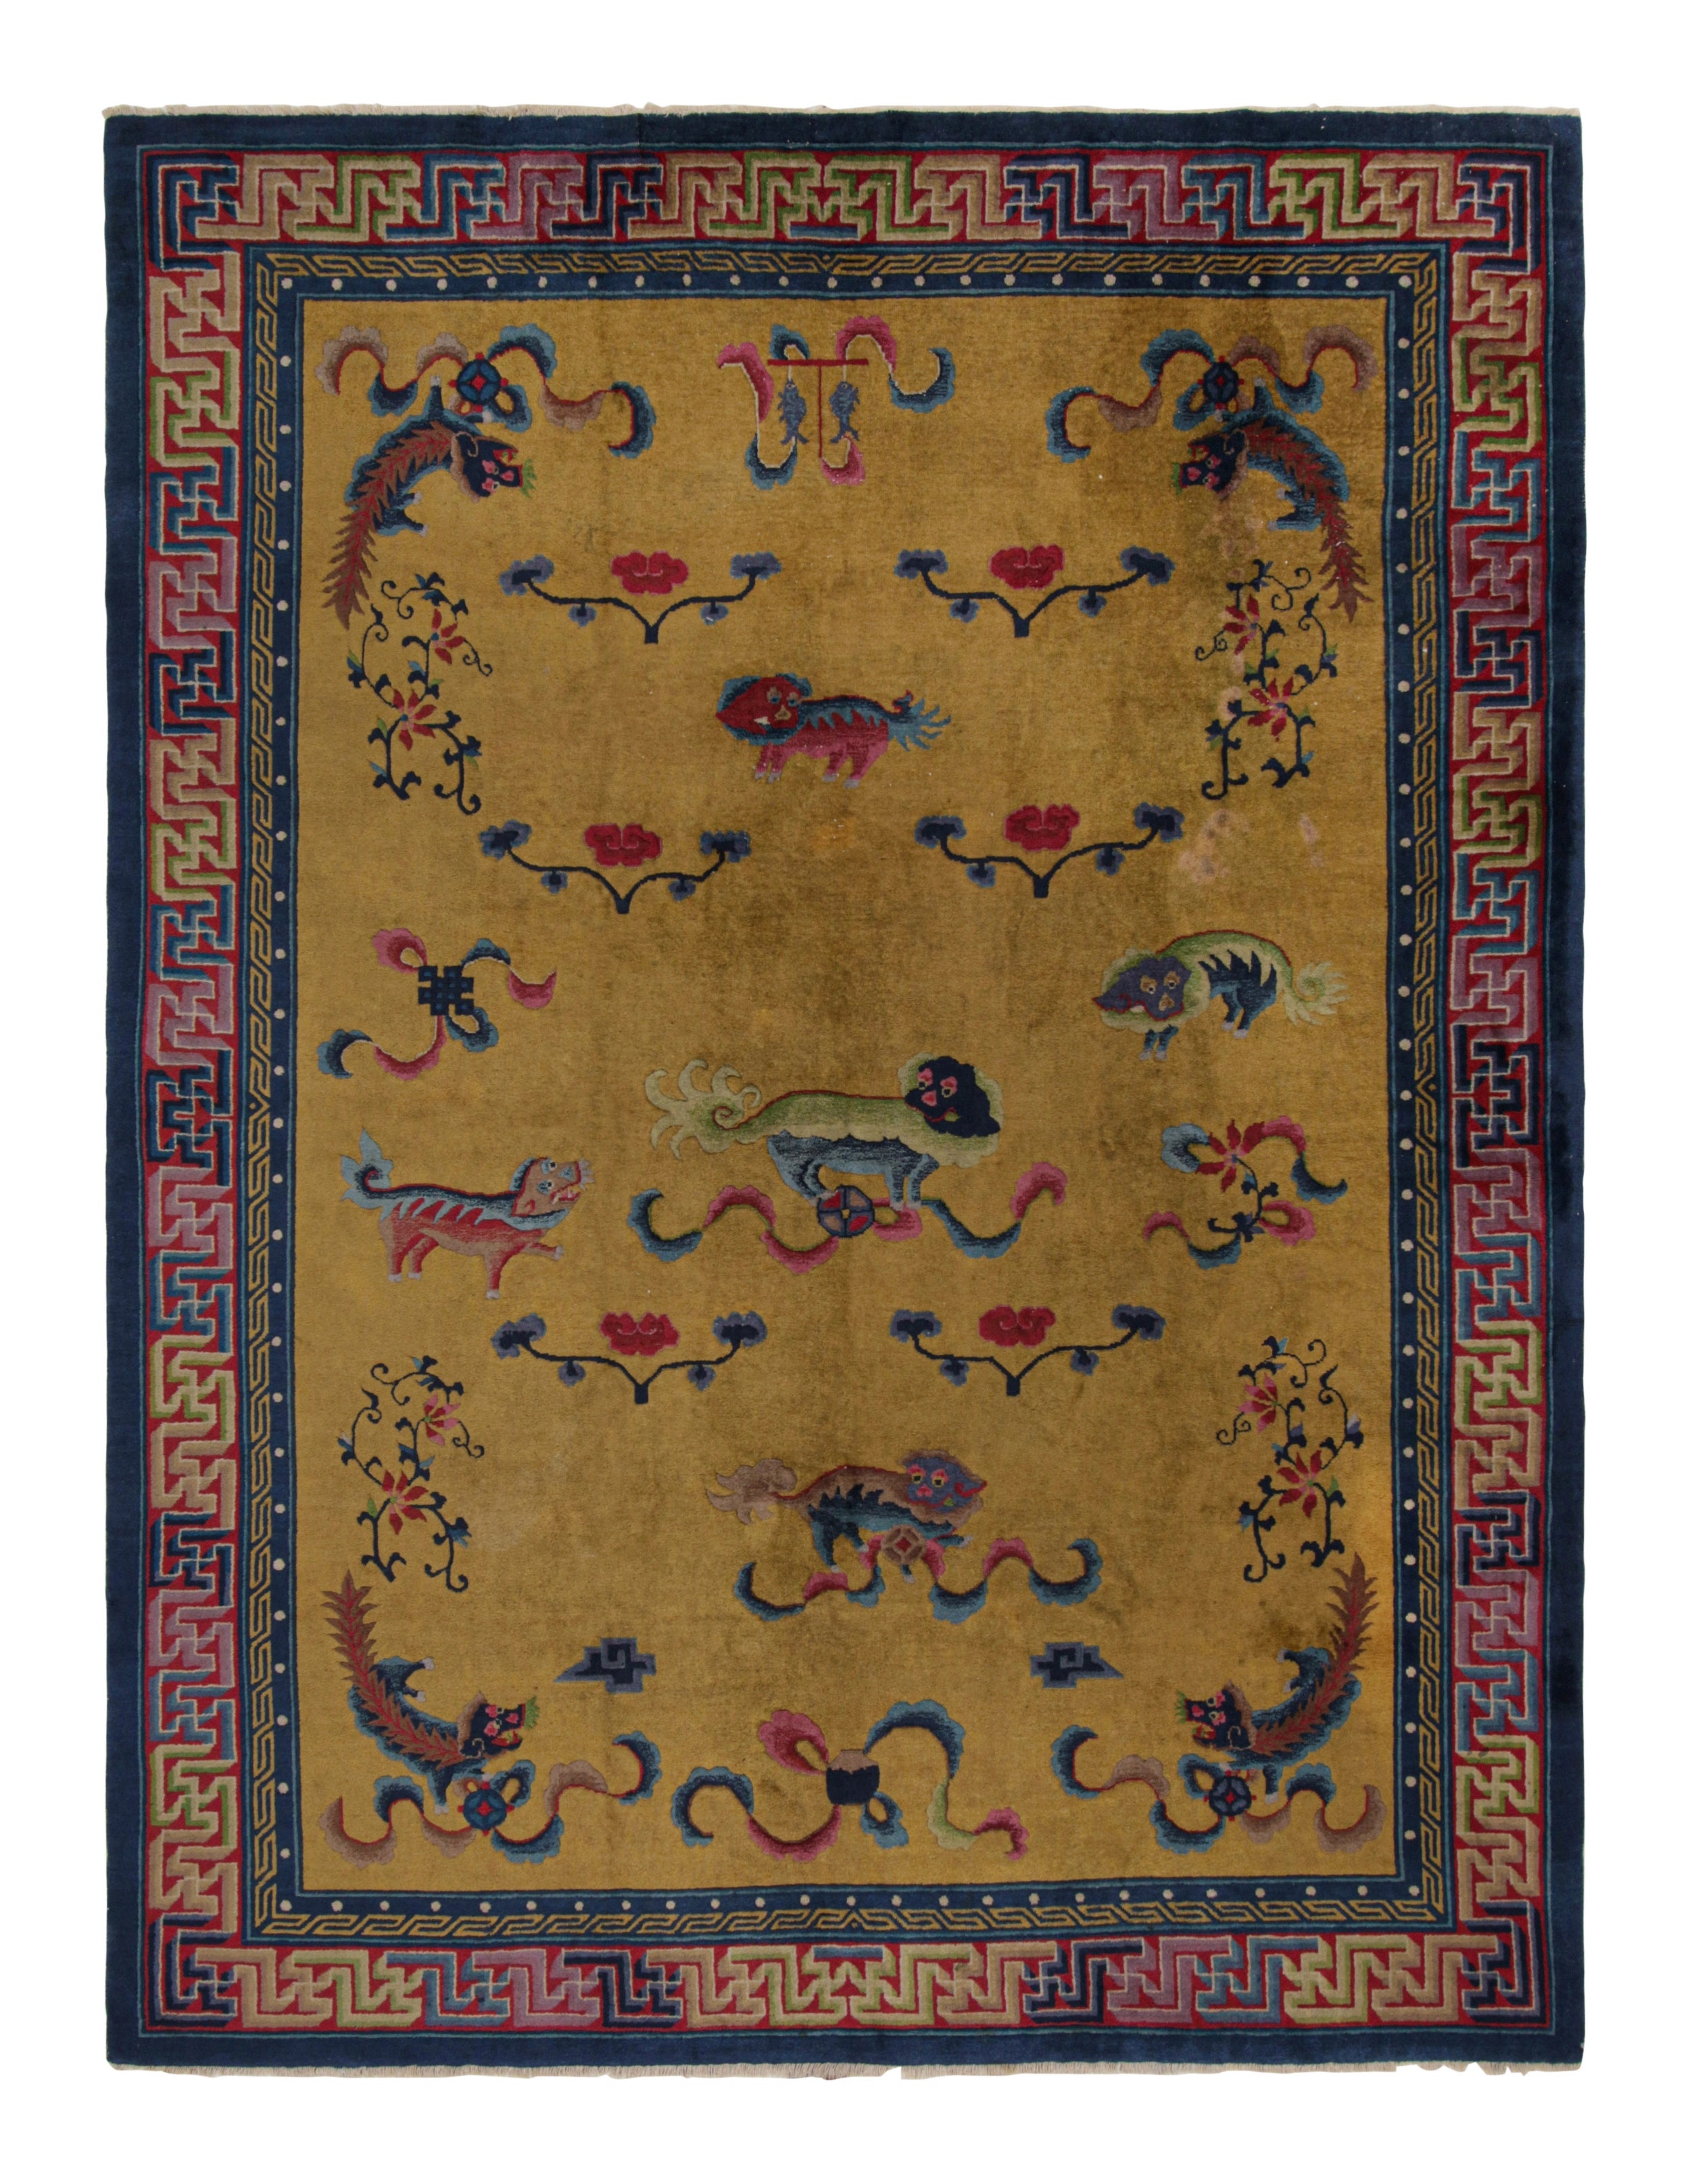 Antique Indochinese Art Deco Rug in Gold with Kirin Pictorials, from Rug & Kilim